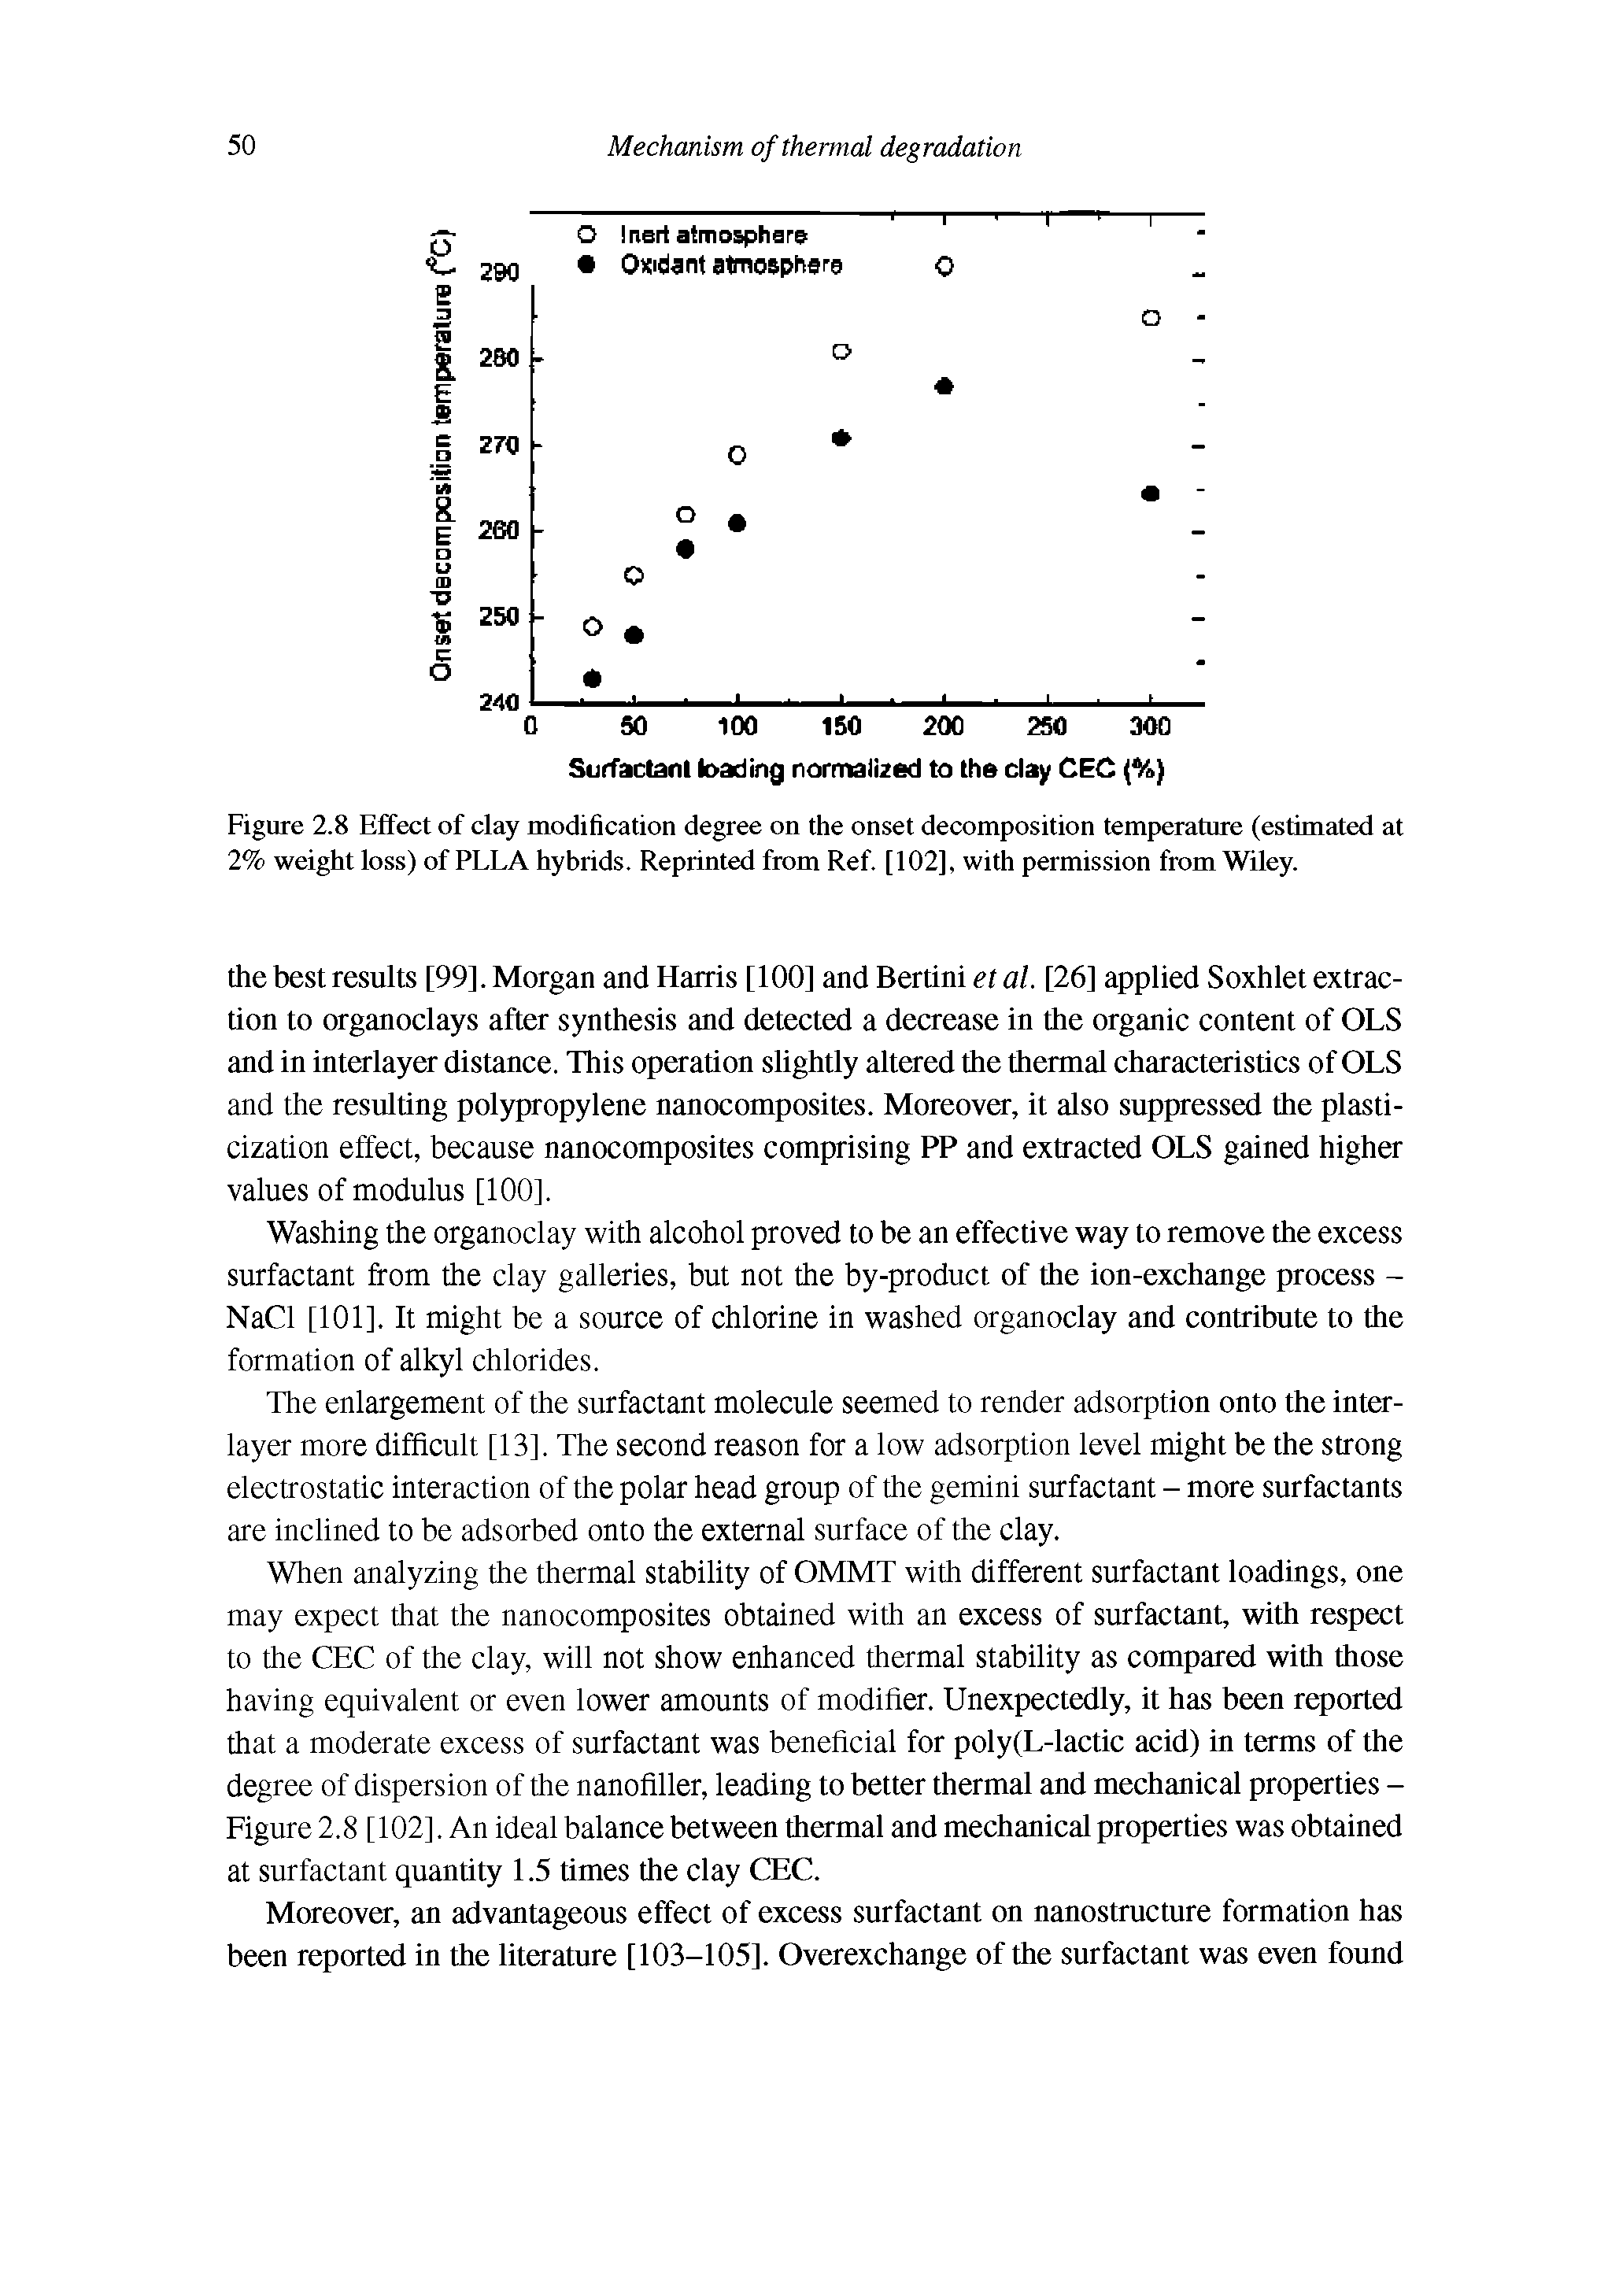 Figure 2.8 Effect of clay modification degree on the onset decomposition temperature (estimated at 2% weight loss) of PLEA hybrids. Reprinted from Ref. [102], with permission from Wiley.